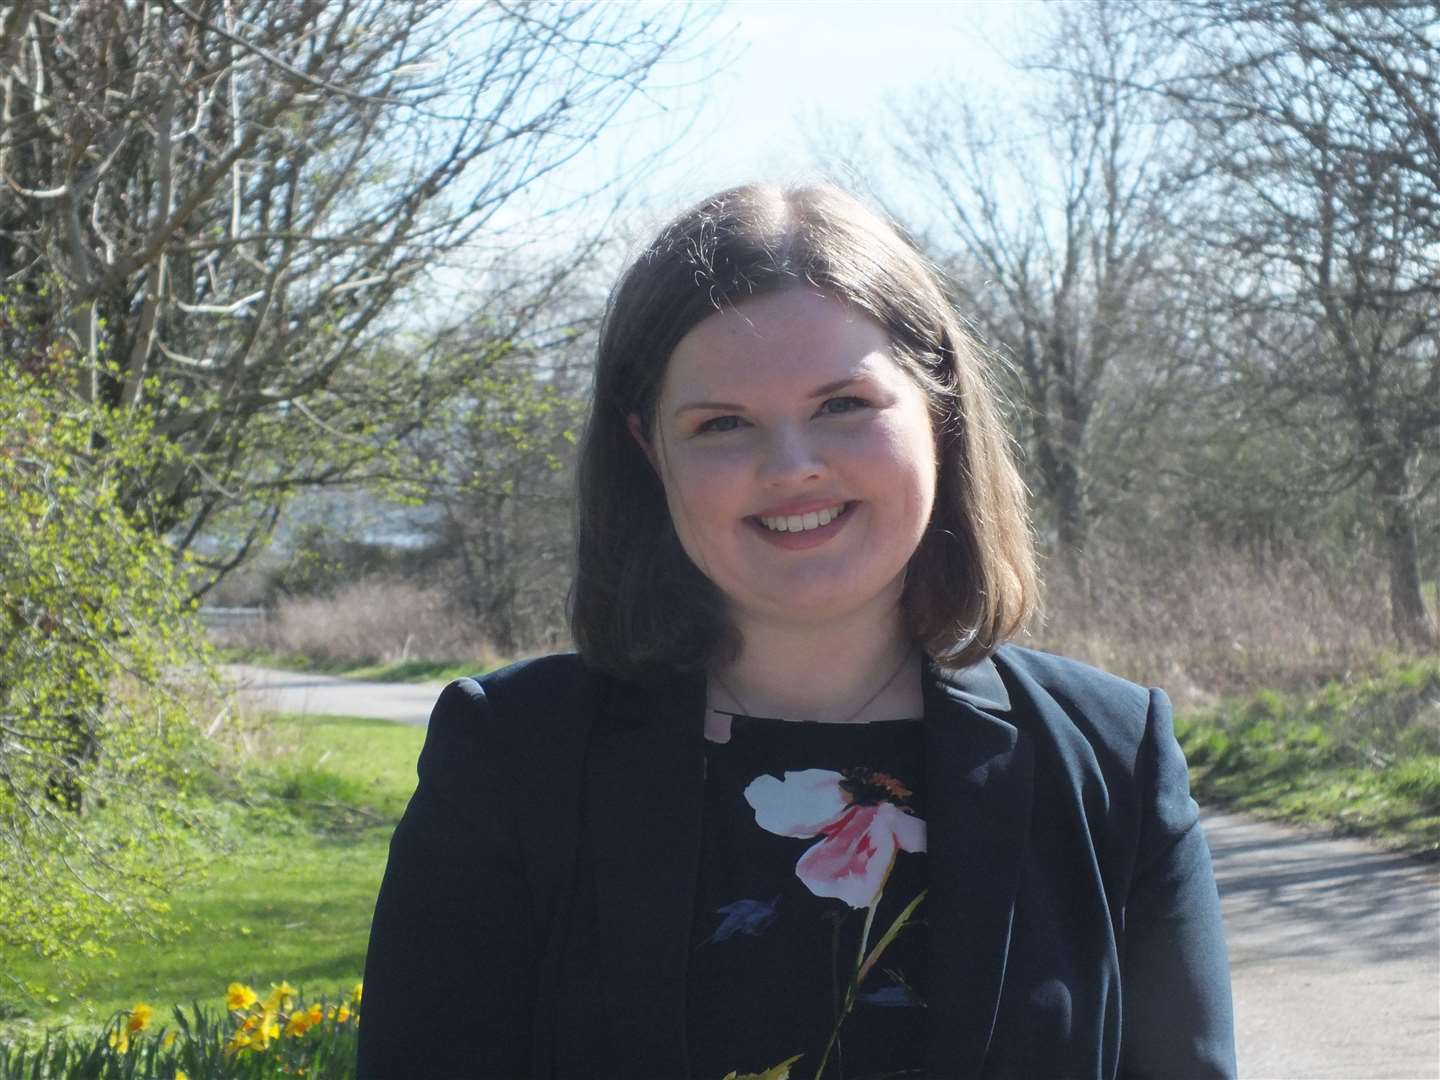 Molly Nolan, the Liberal Democrat candidate for Caithness, Sutherland and Ross.